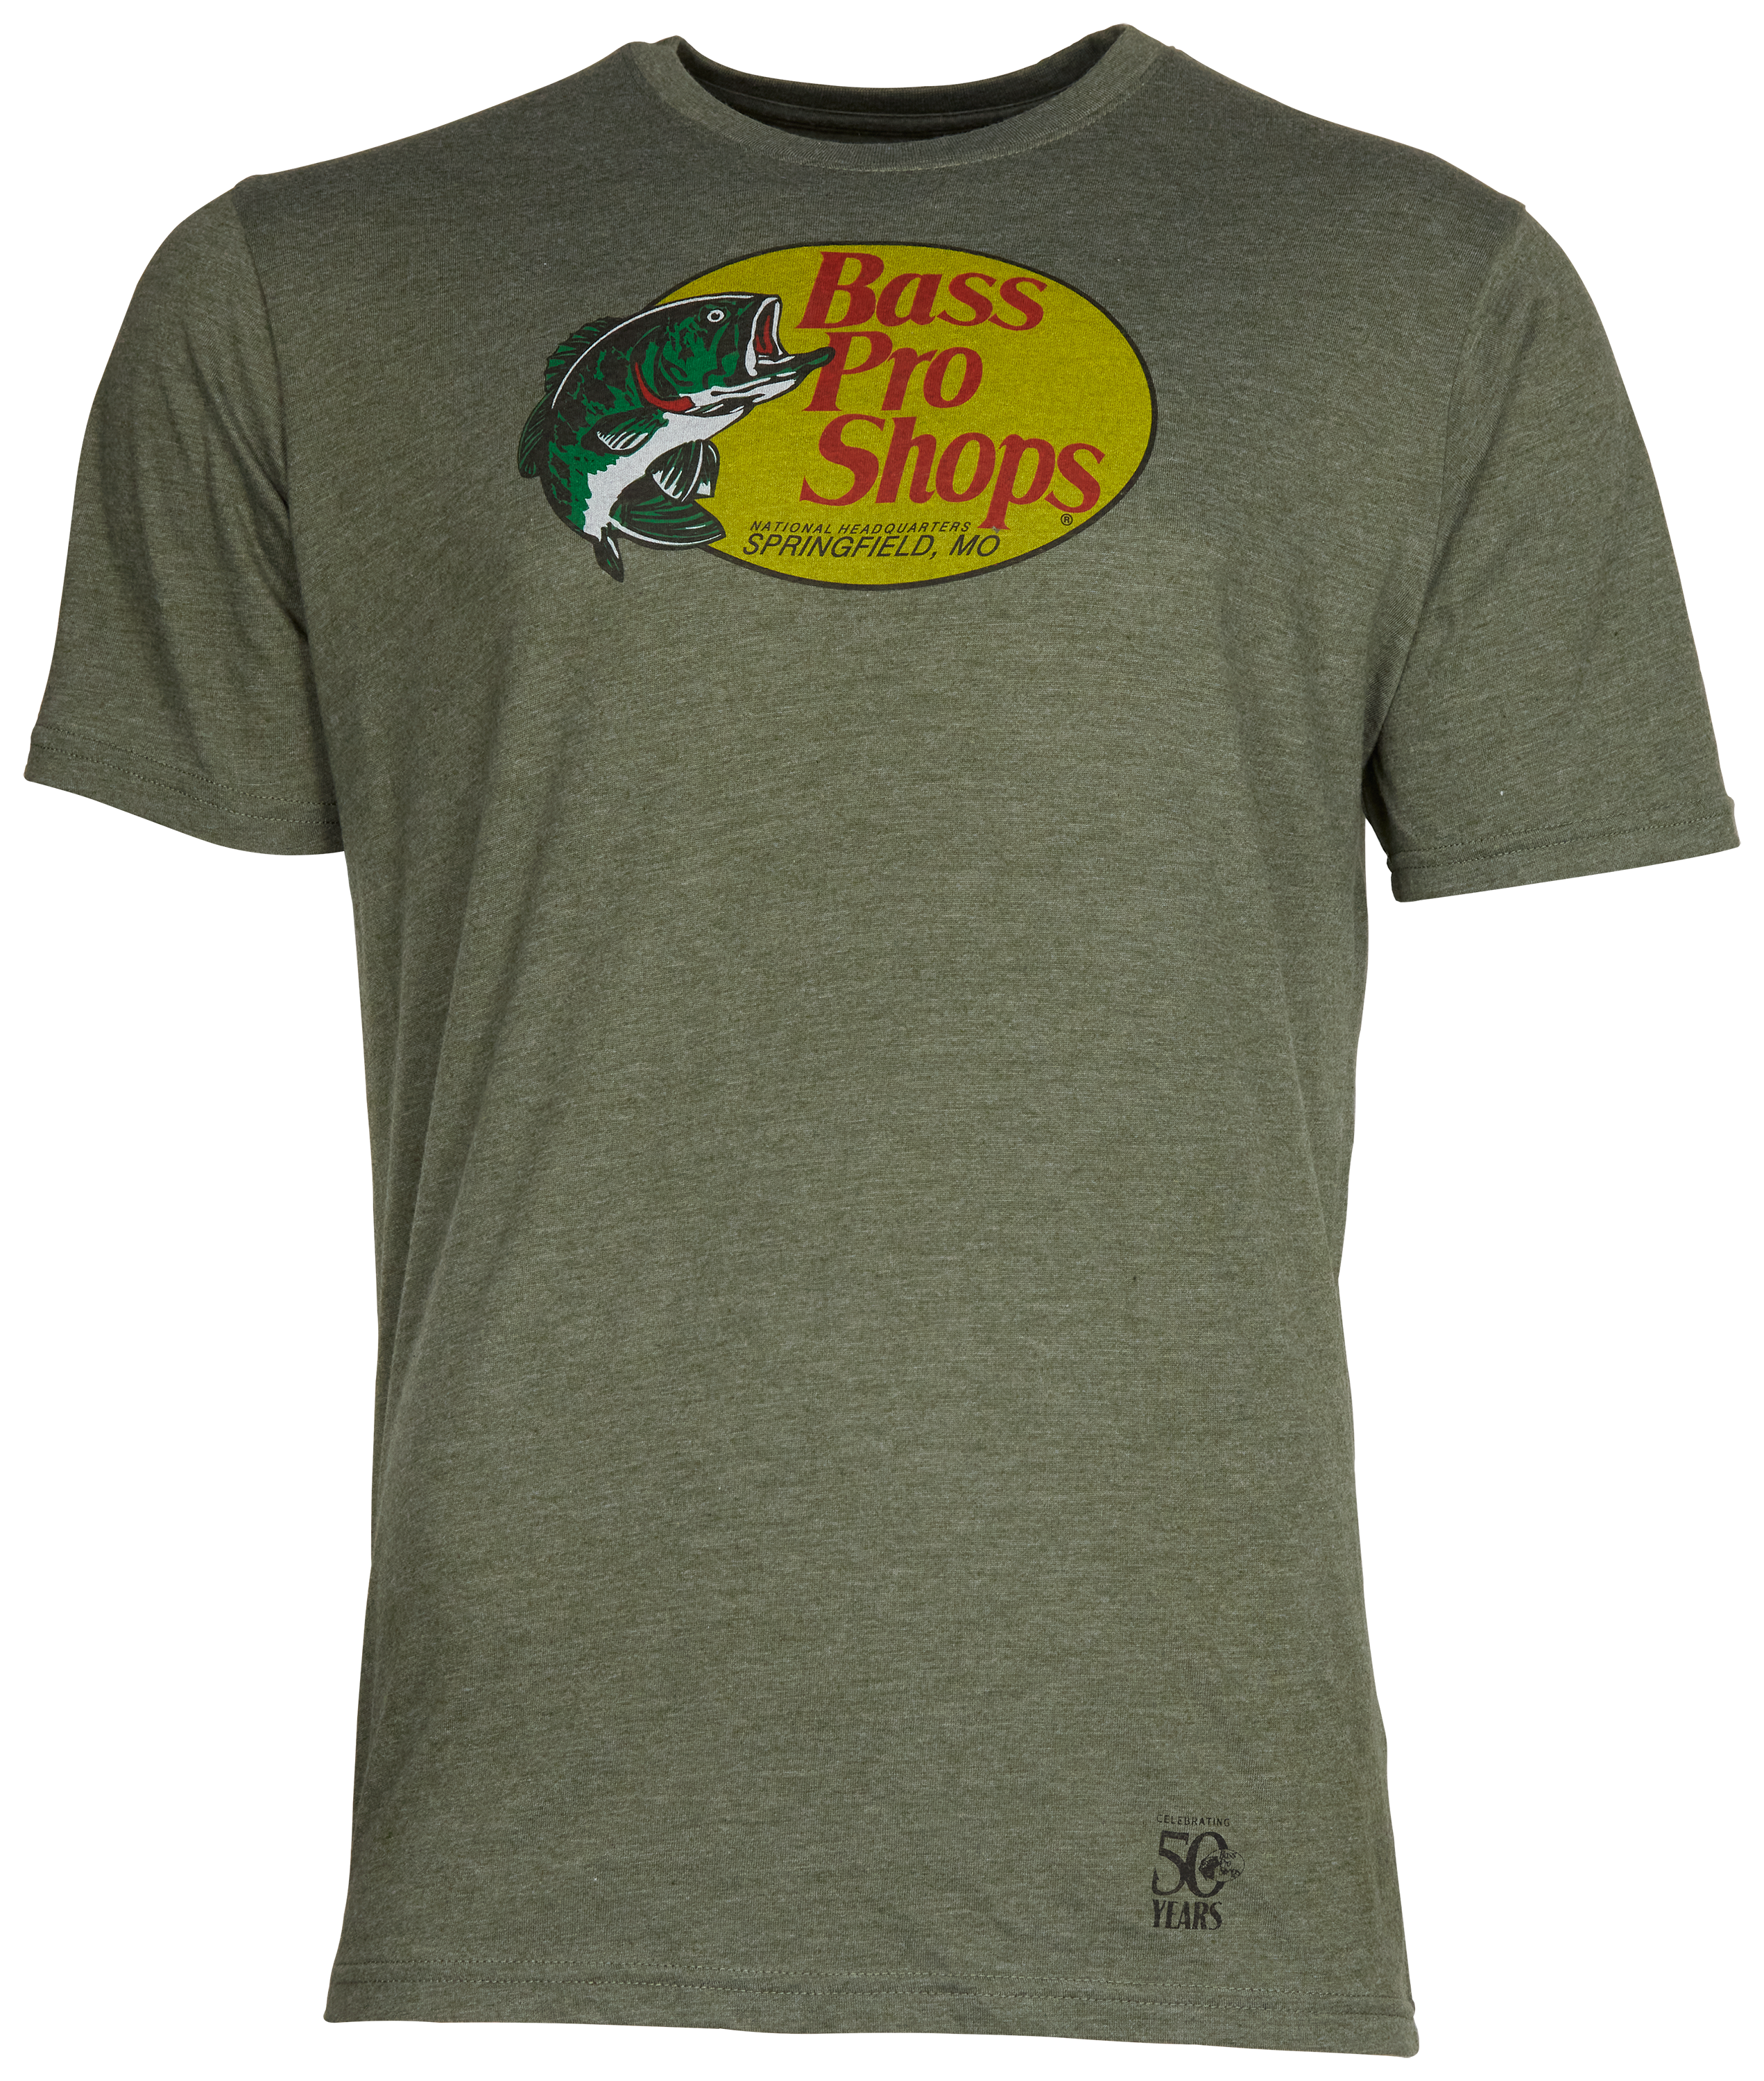 Bass Pro Shops 50th Anniversary Vintage Woodcut Short-Sleeve T-Shirt for Men - Navy Heather - S